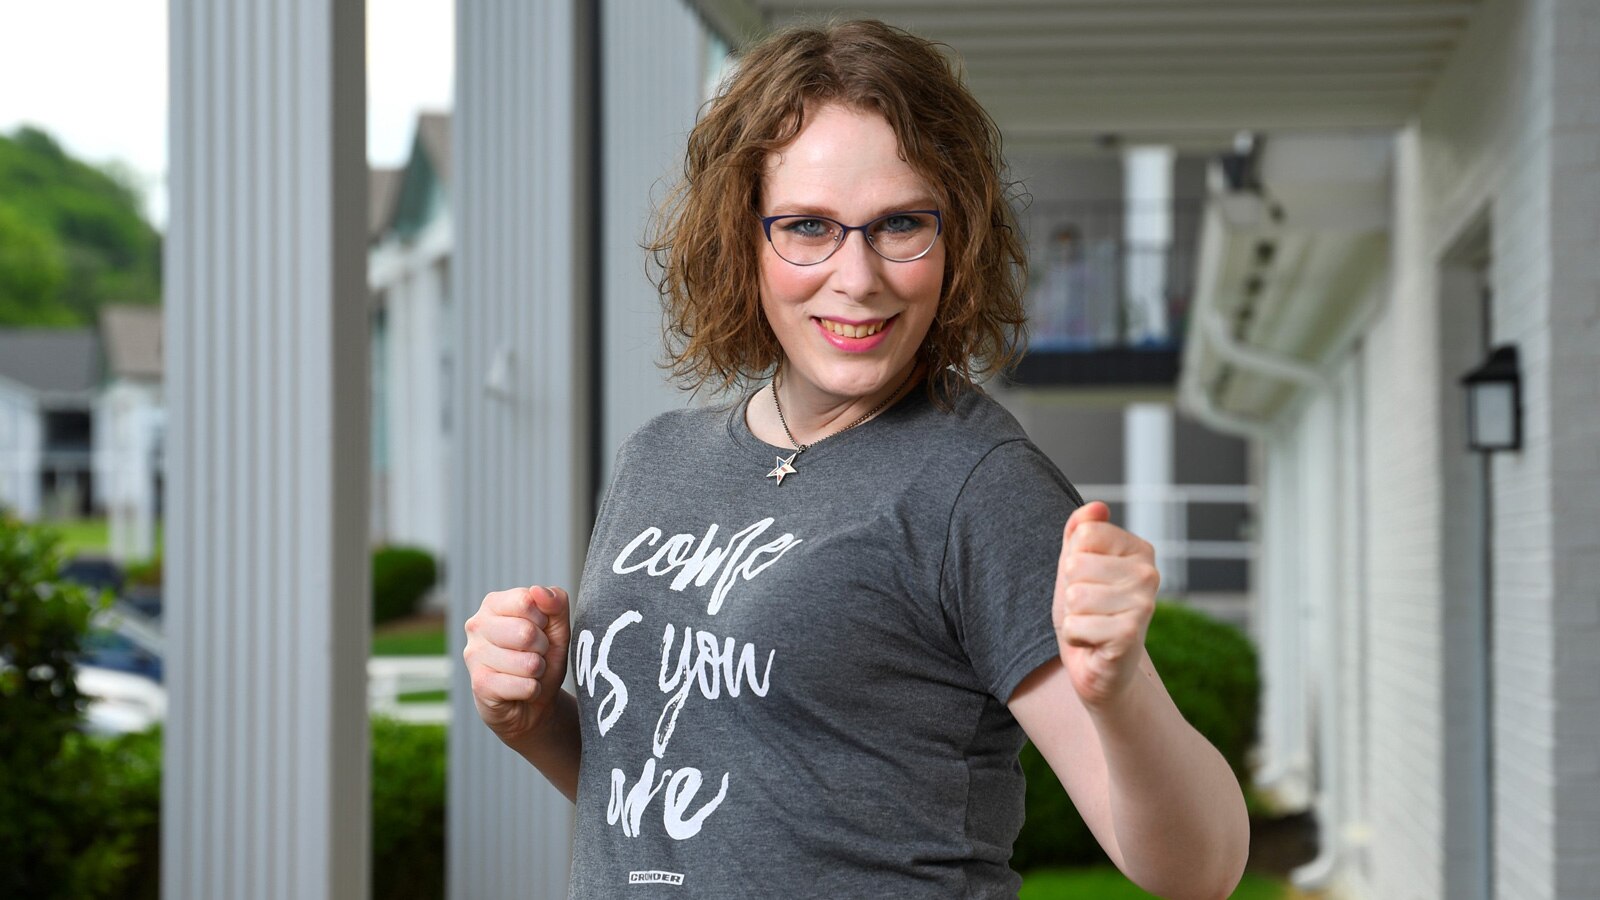 Melissa Price wears a shirt that reads “Come as you are” and she strikes a playful, empowered pose.